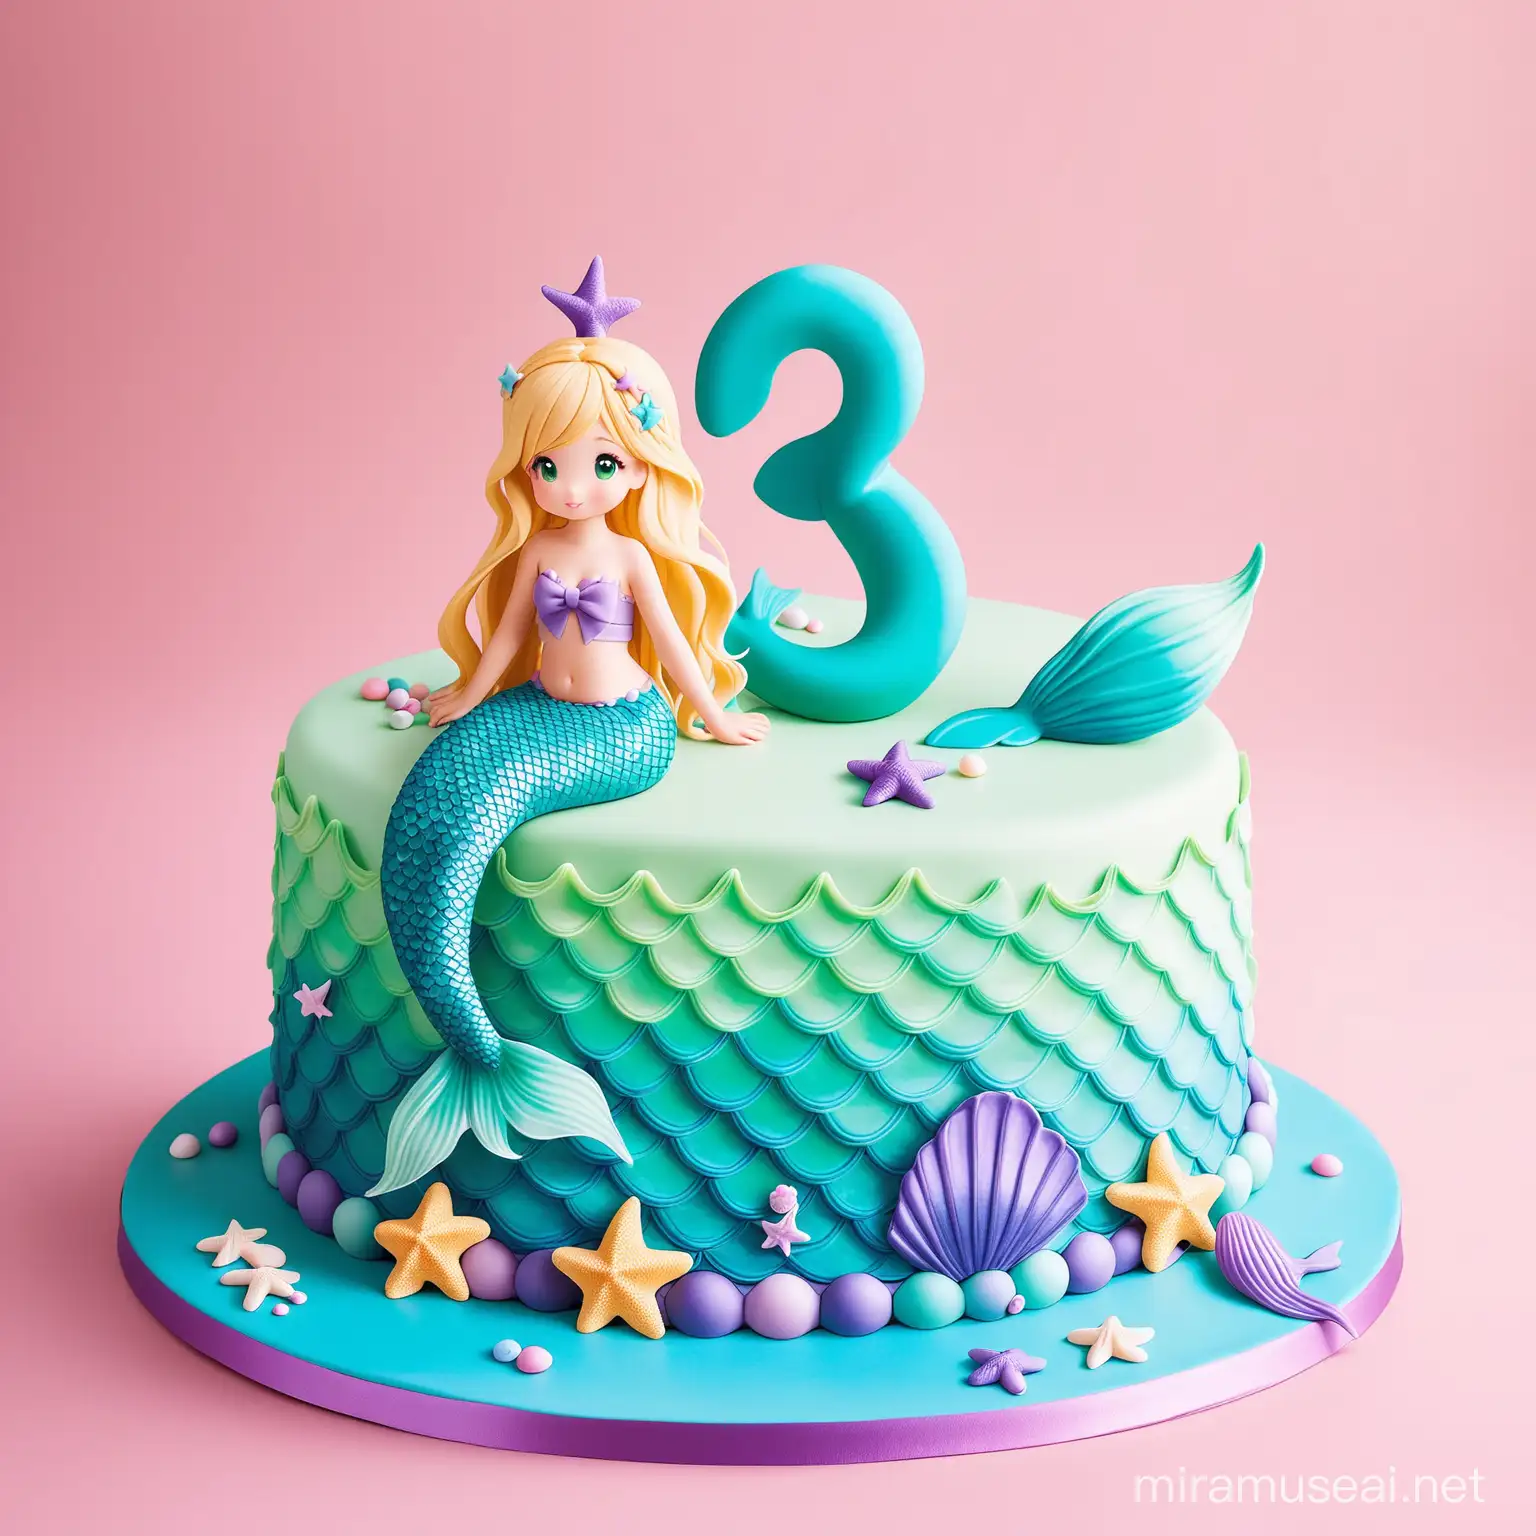 Mermaid birthday cake with small girl blonde hair and a number 3